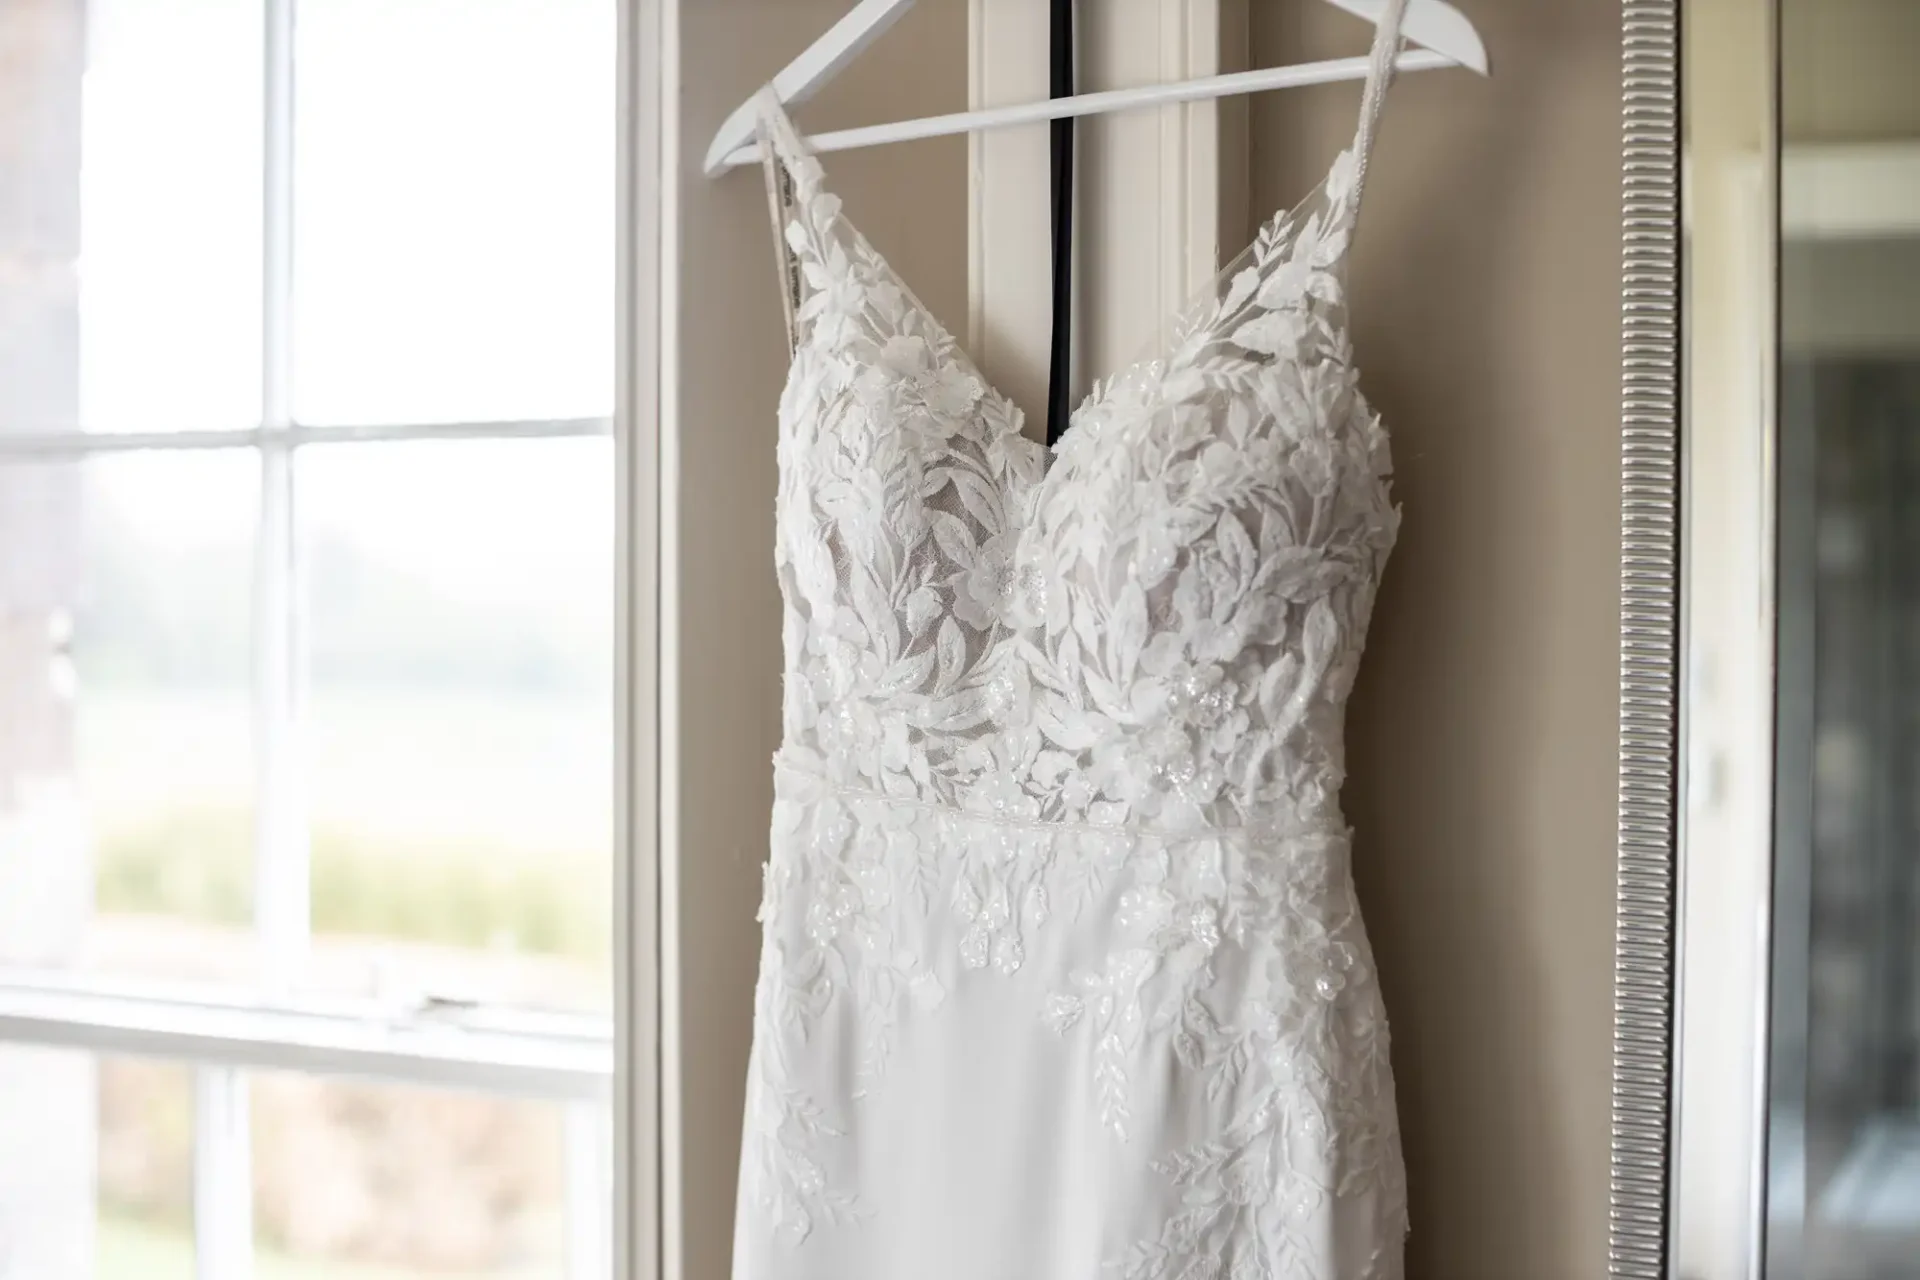 A white lace wedding dress hung on a hanger by a window with natural light streaming in.